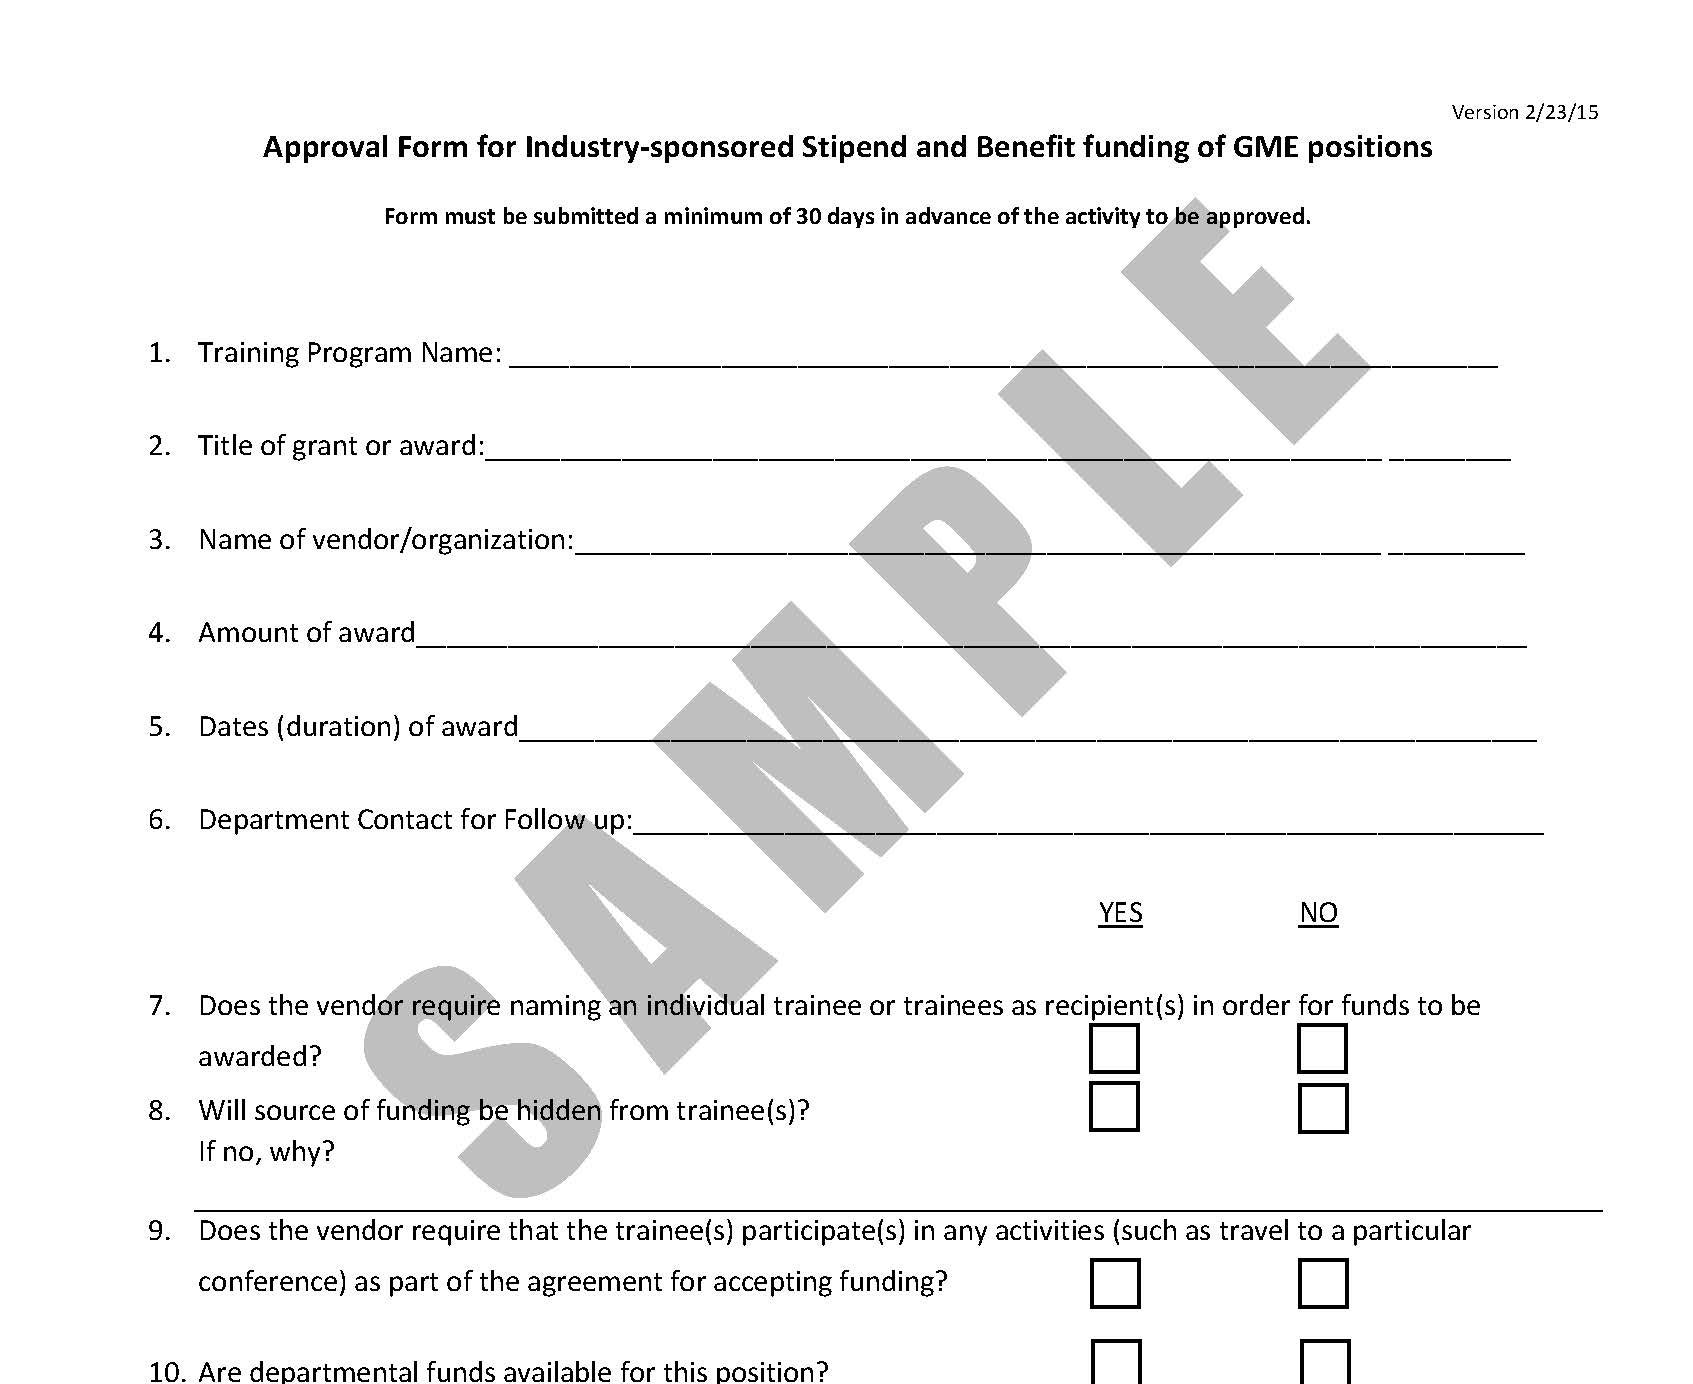 GME Approval Form for Industry Related Stipend Benefits